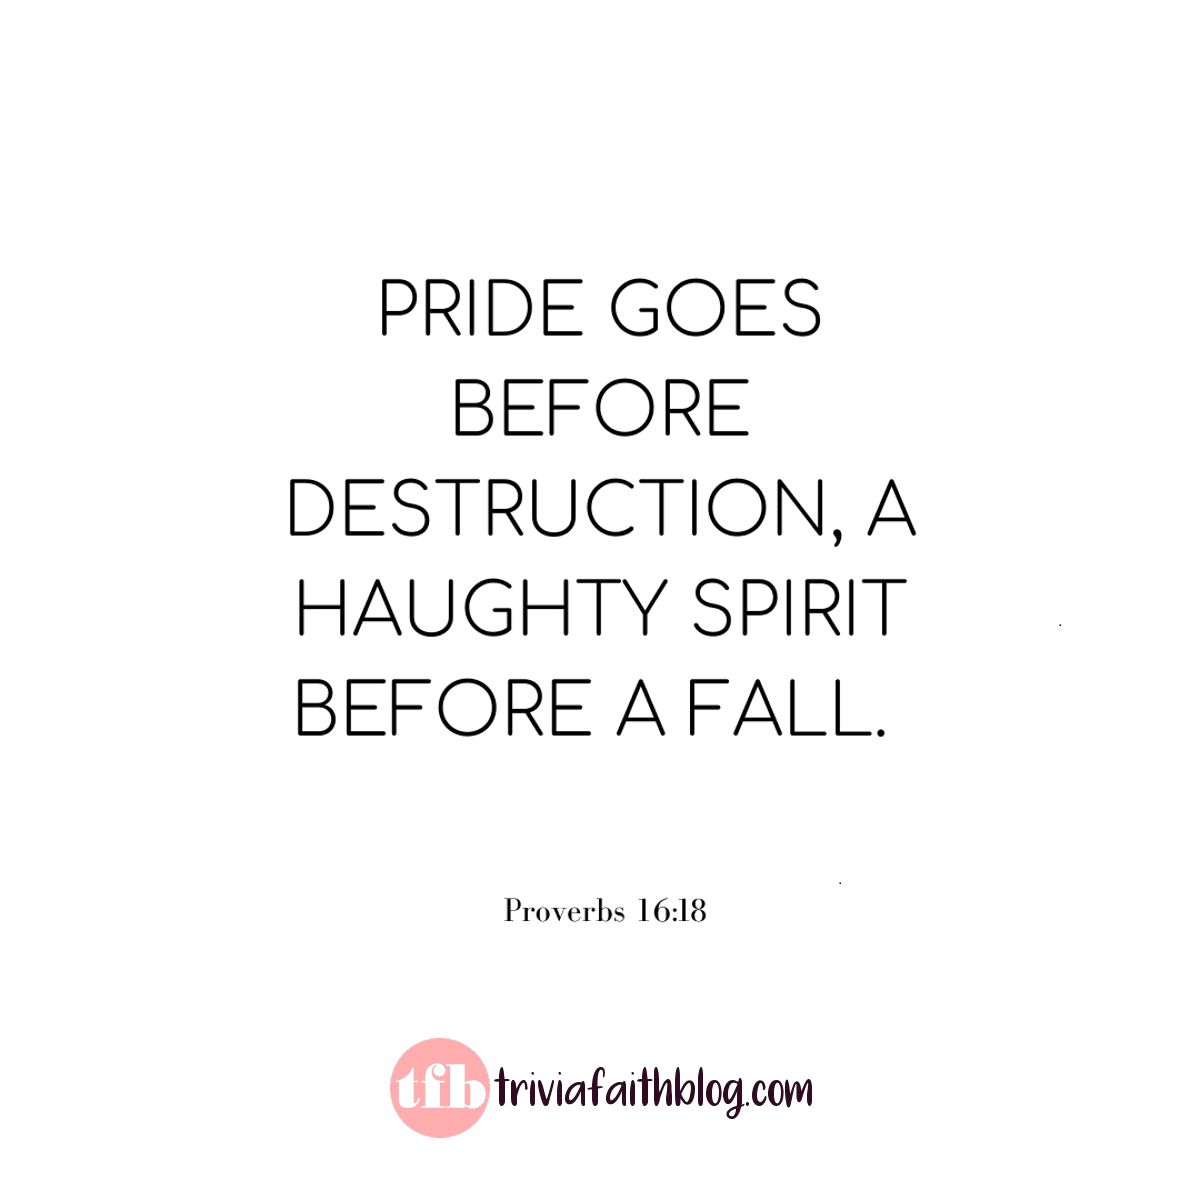 Pride goes before destruction, a haughty spirit before a fall